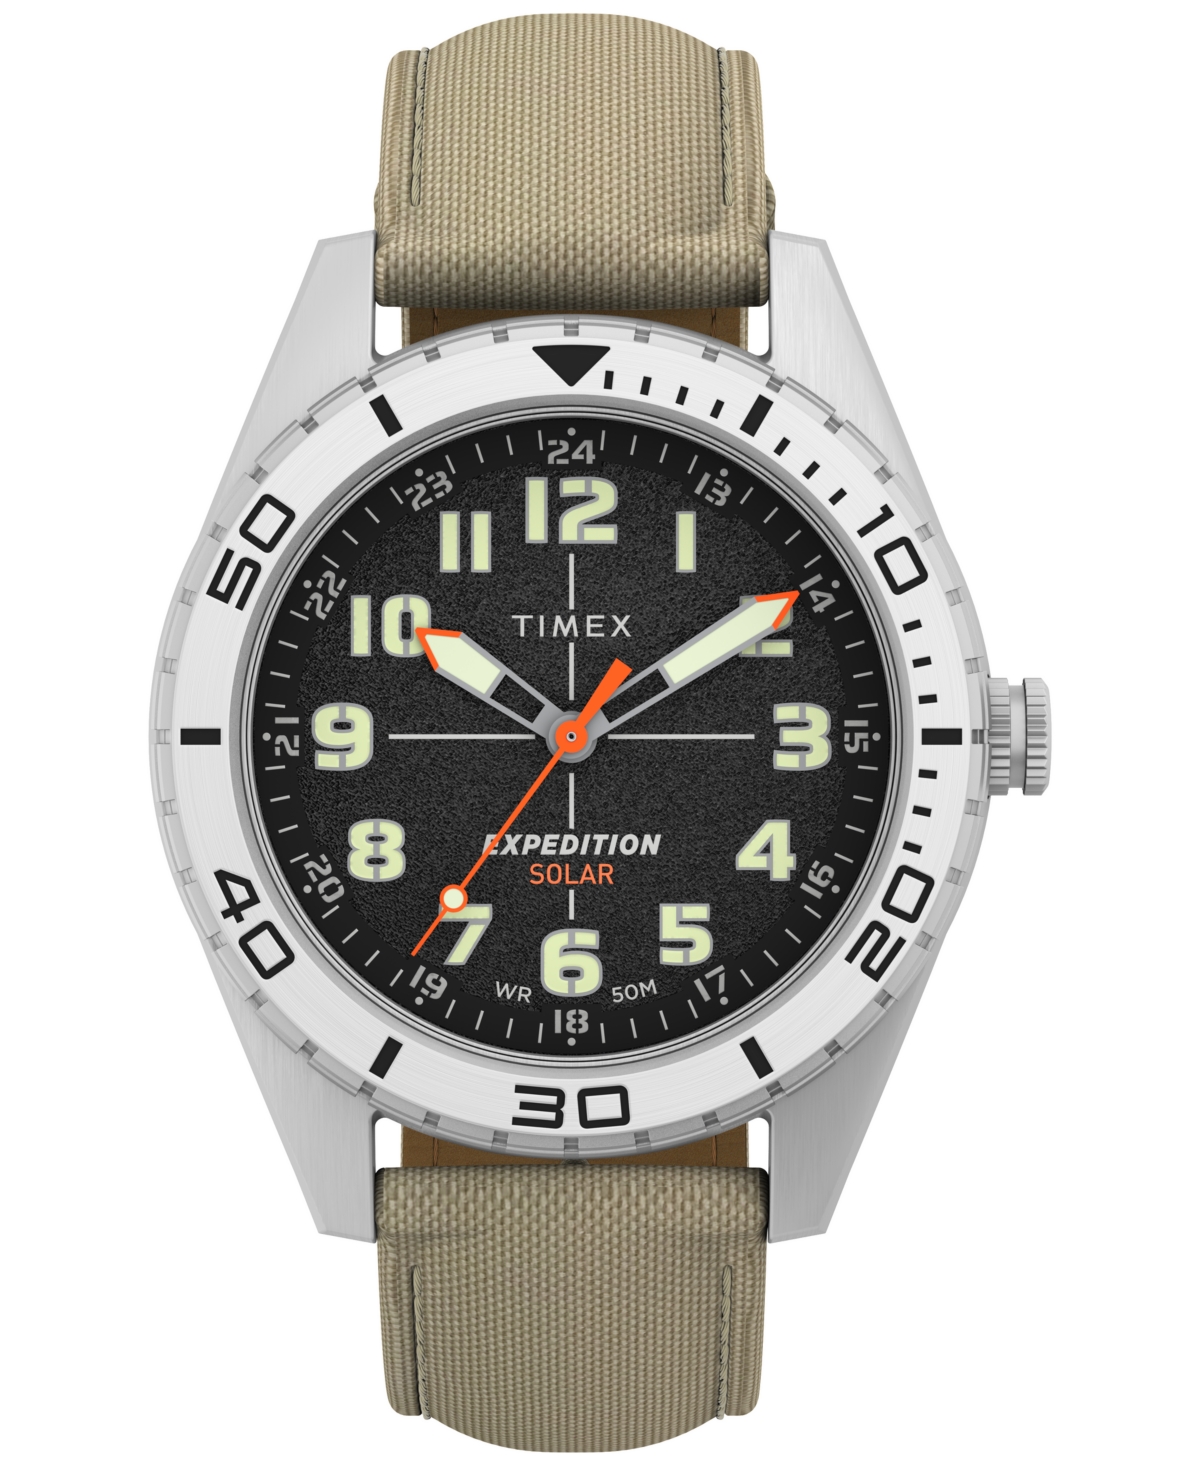 Men's Expedition Field Analog Solar Tan material Strap 43mm Round Watch - Tan